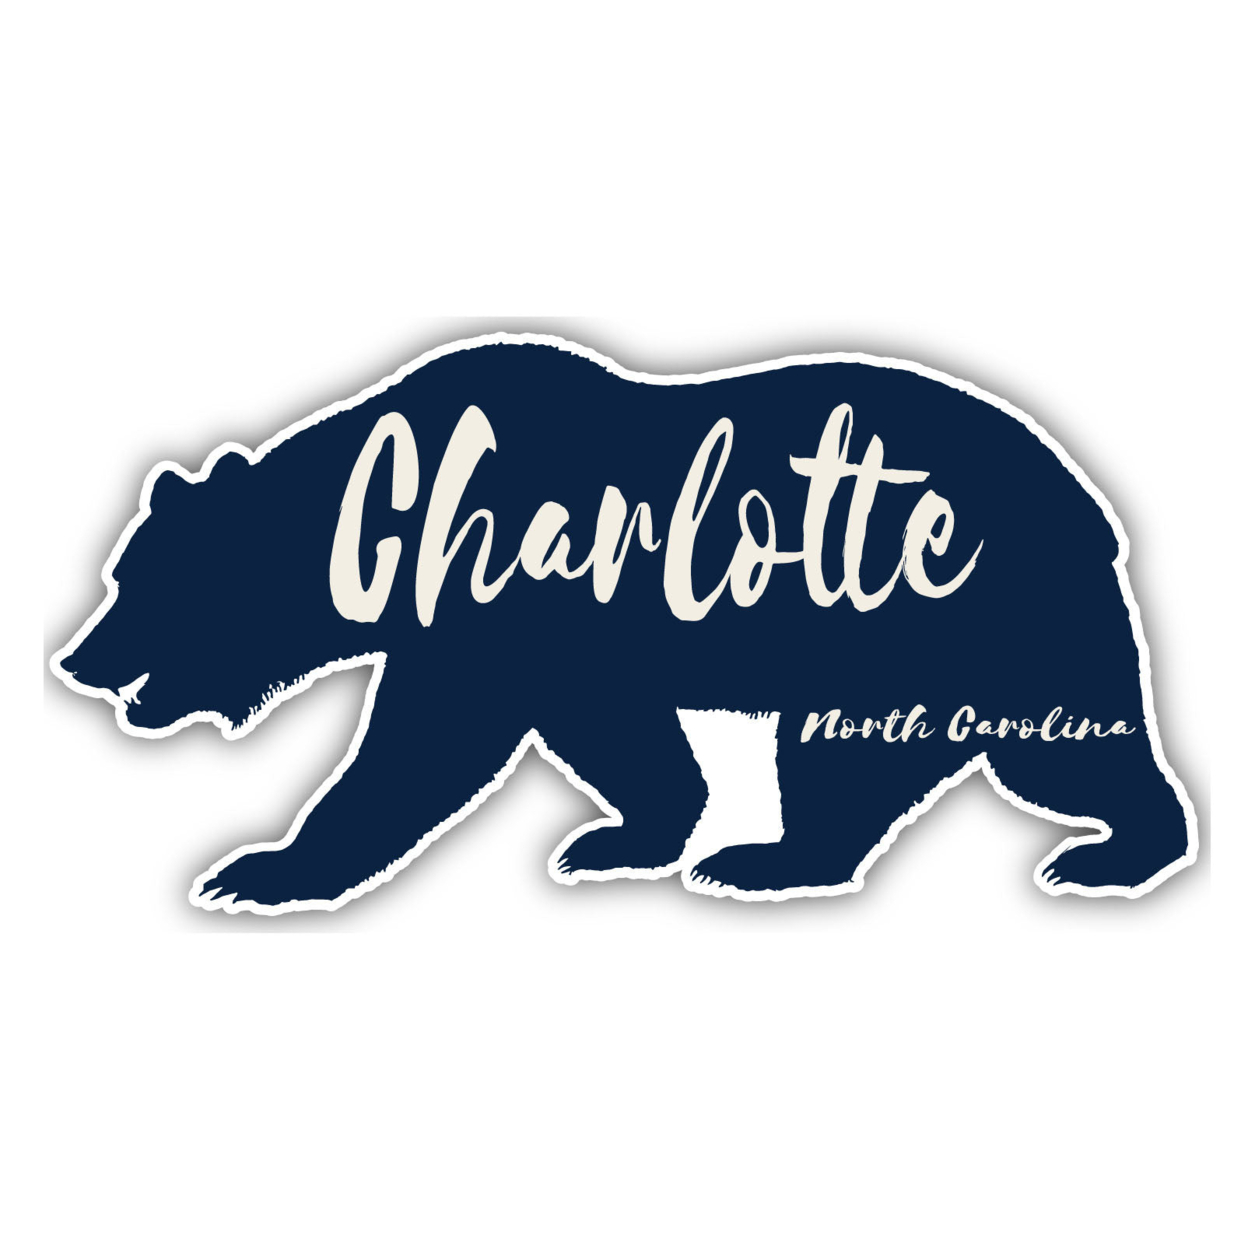 Charlotte North Carolina Souvenir Decorative Stickers (Choose Theme And Size) - 4-Pack, 4-Inch, Great Outdoors